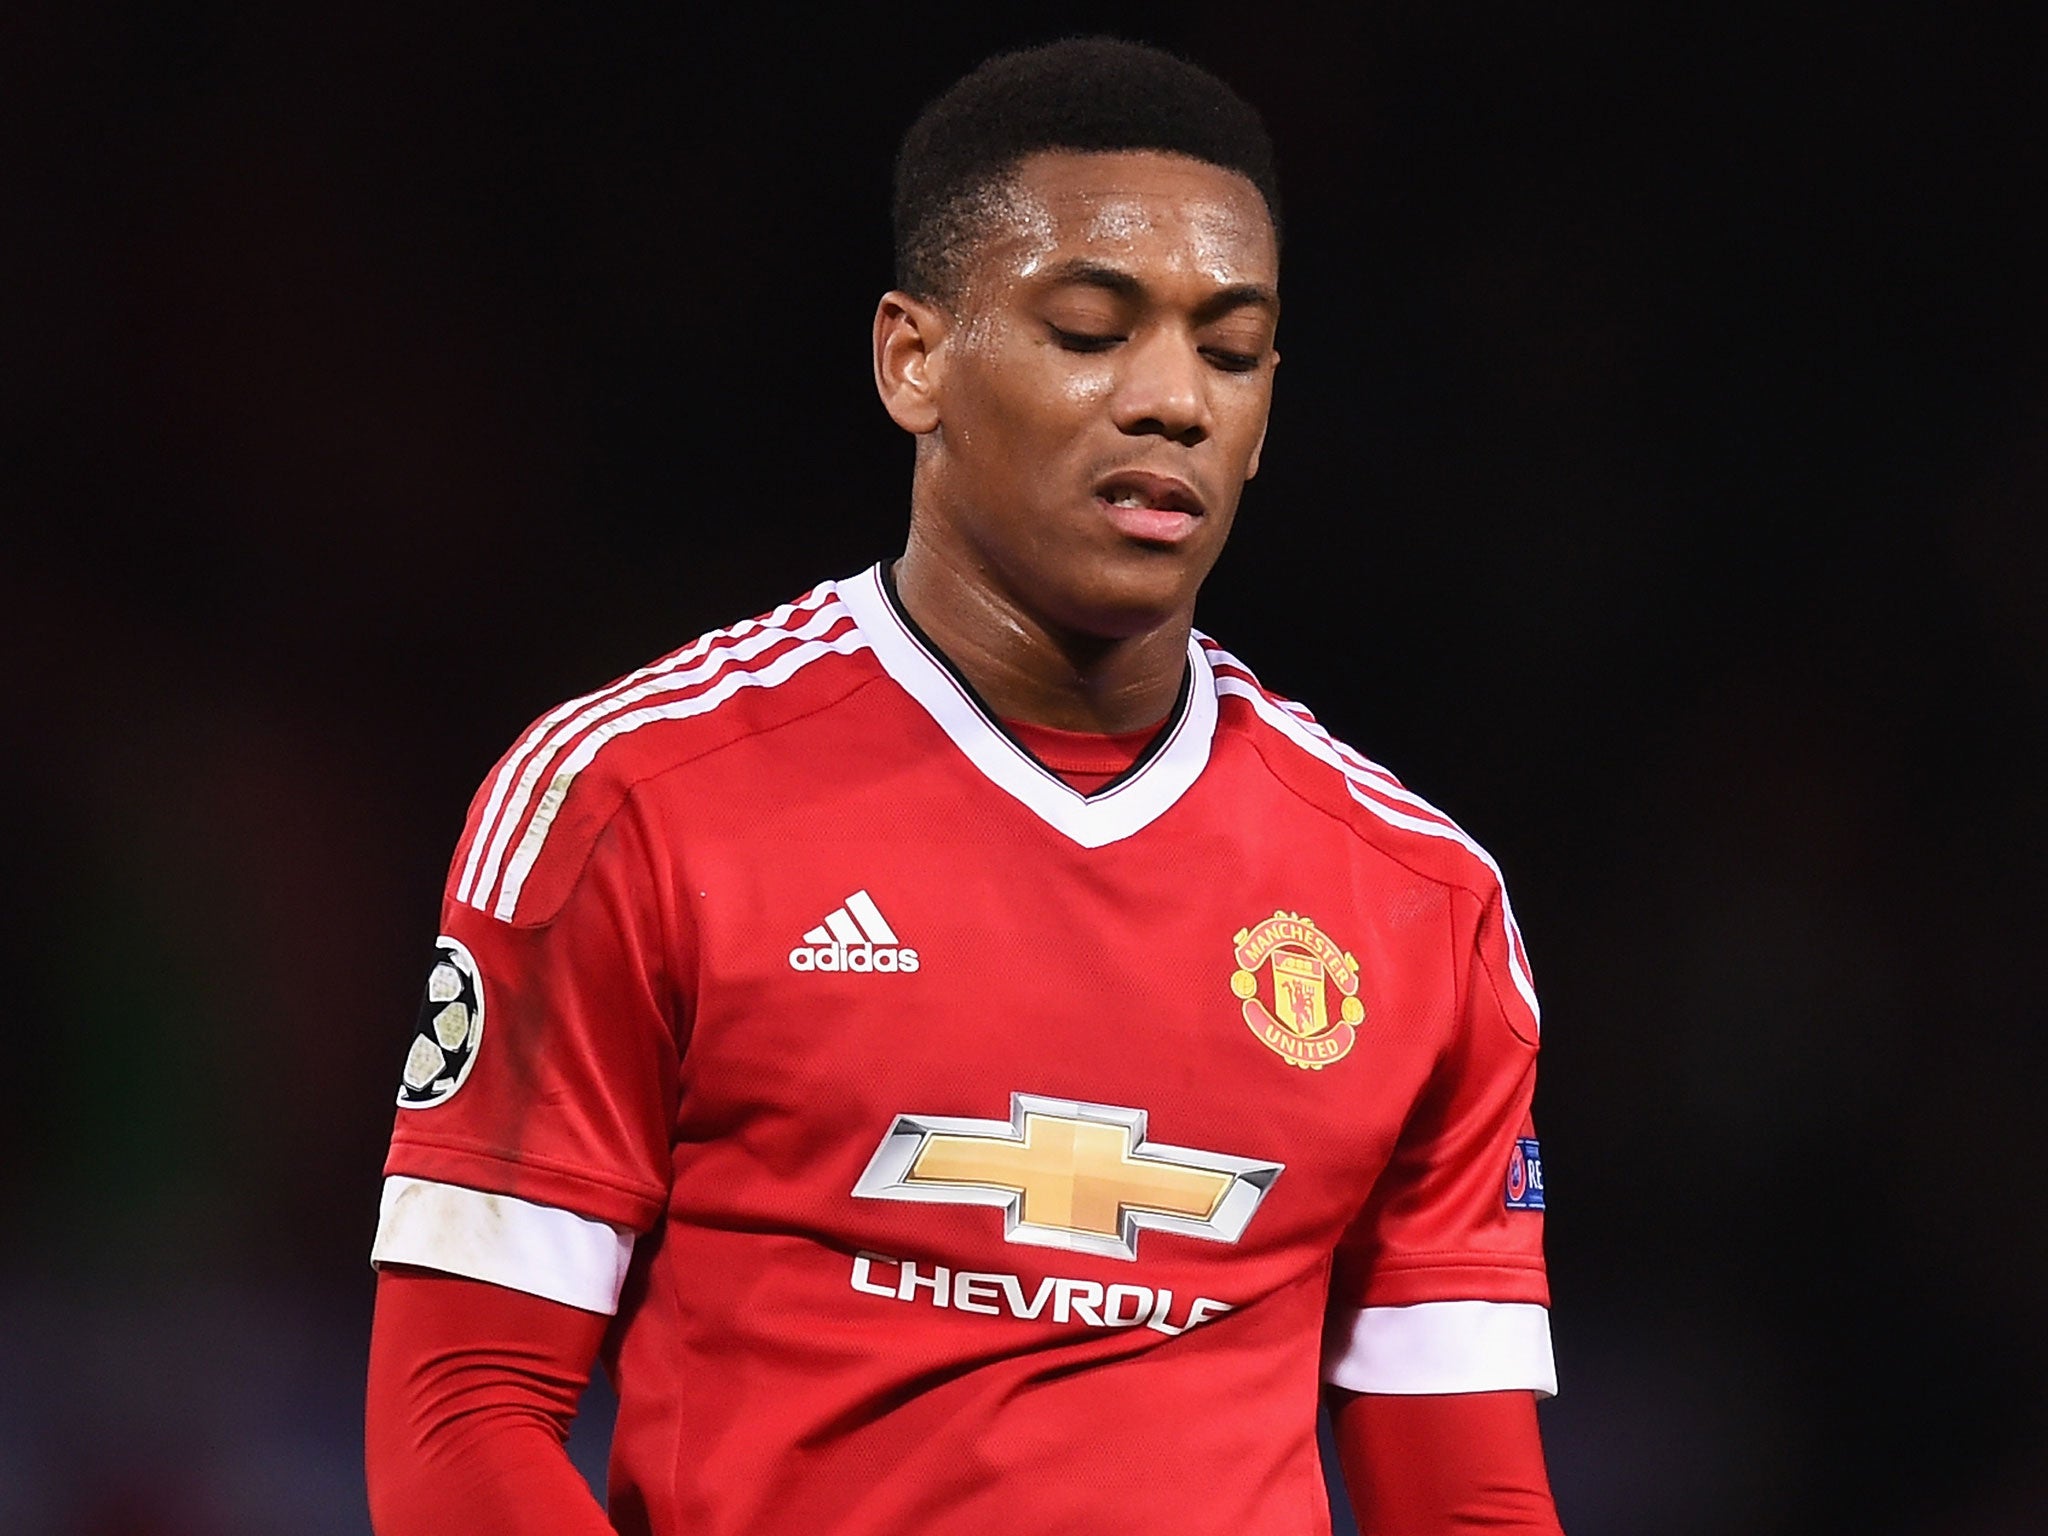 Anthony Martial has not scored in his last six matches for Manchester United